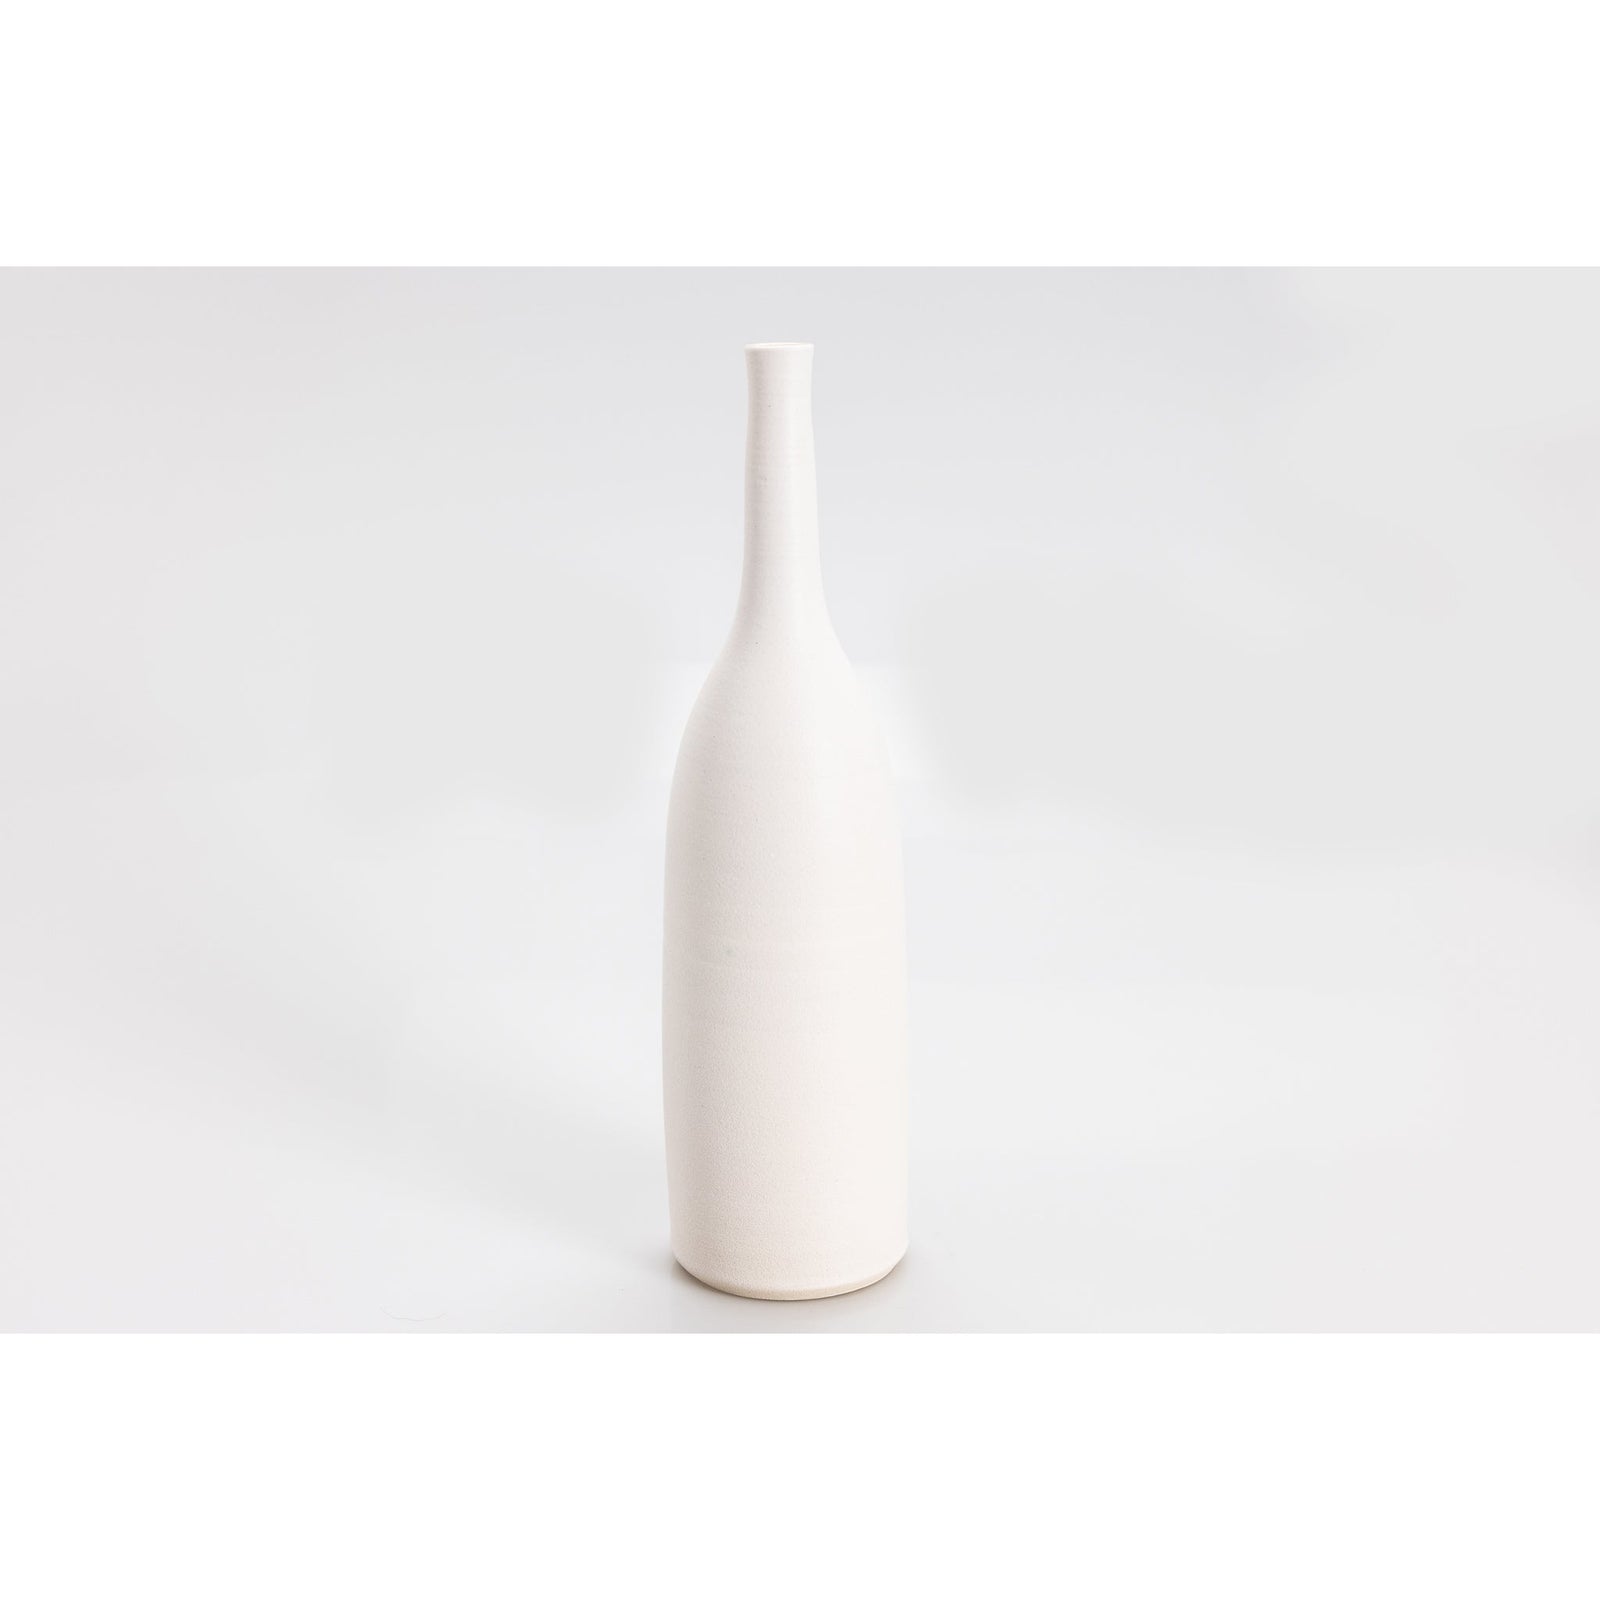 'LB145 Chalk White Bottle' by Lucy Burley ceramics, available at Padstow Gallery, Cornwall